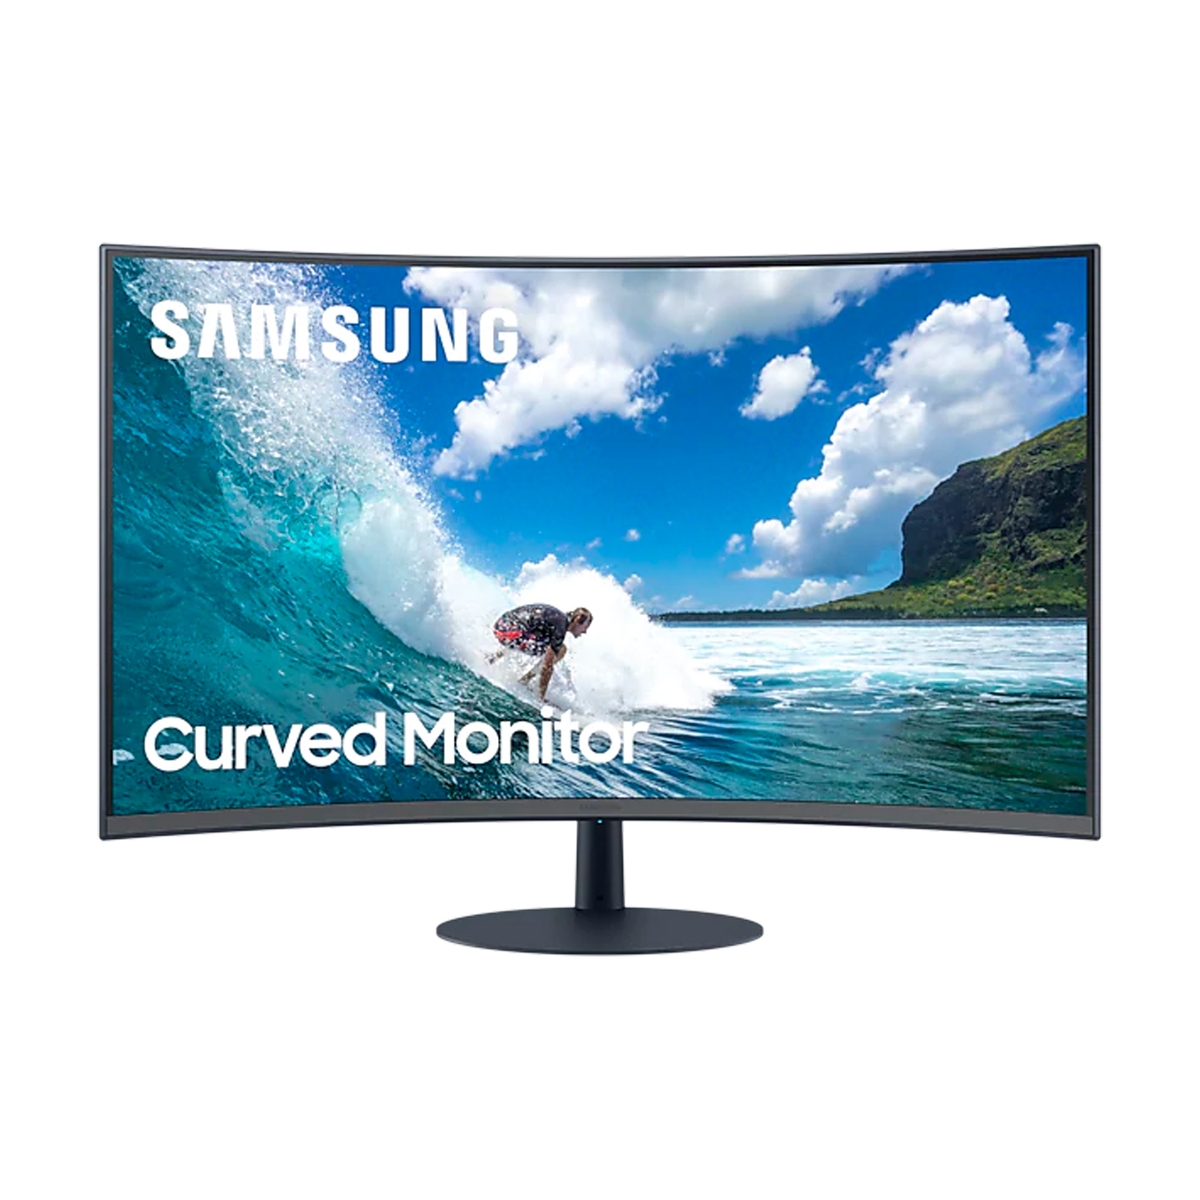 27 Odyssey G5 WQHD Gaming Monitor with 1000R curved screen